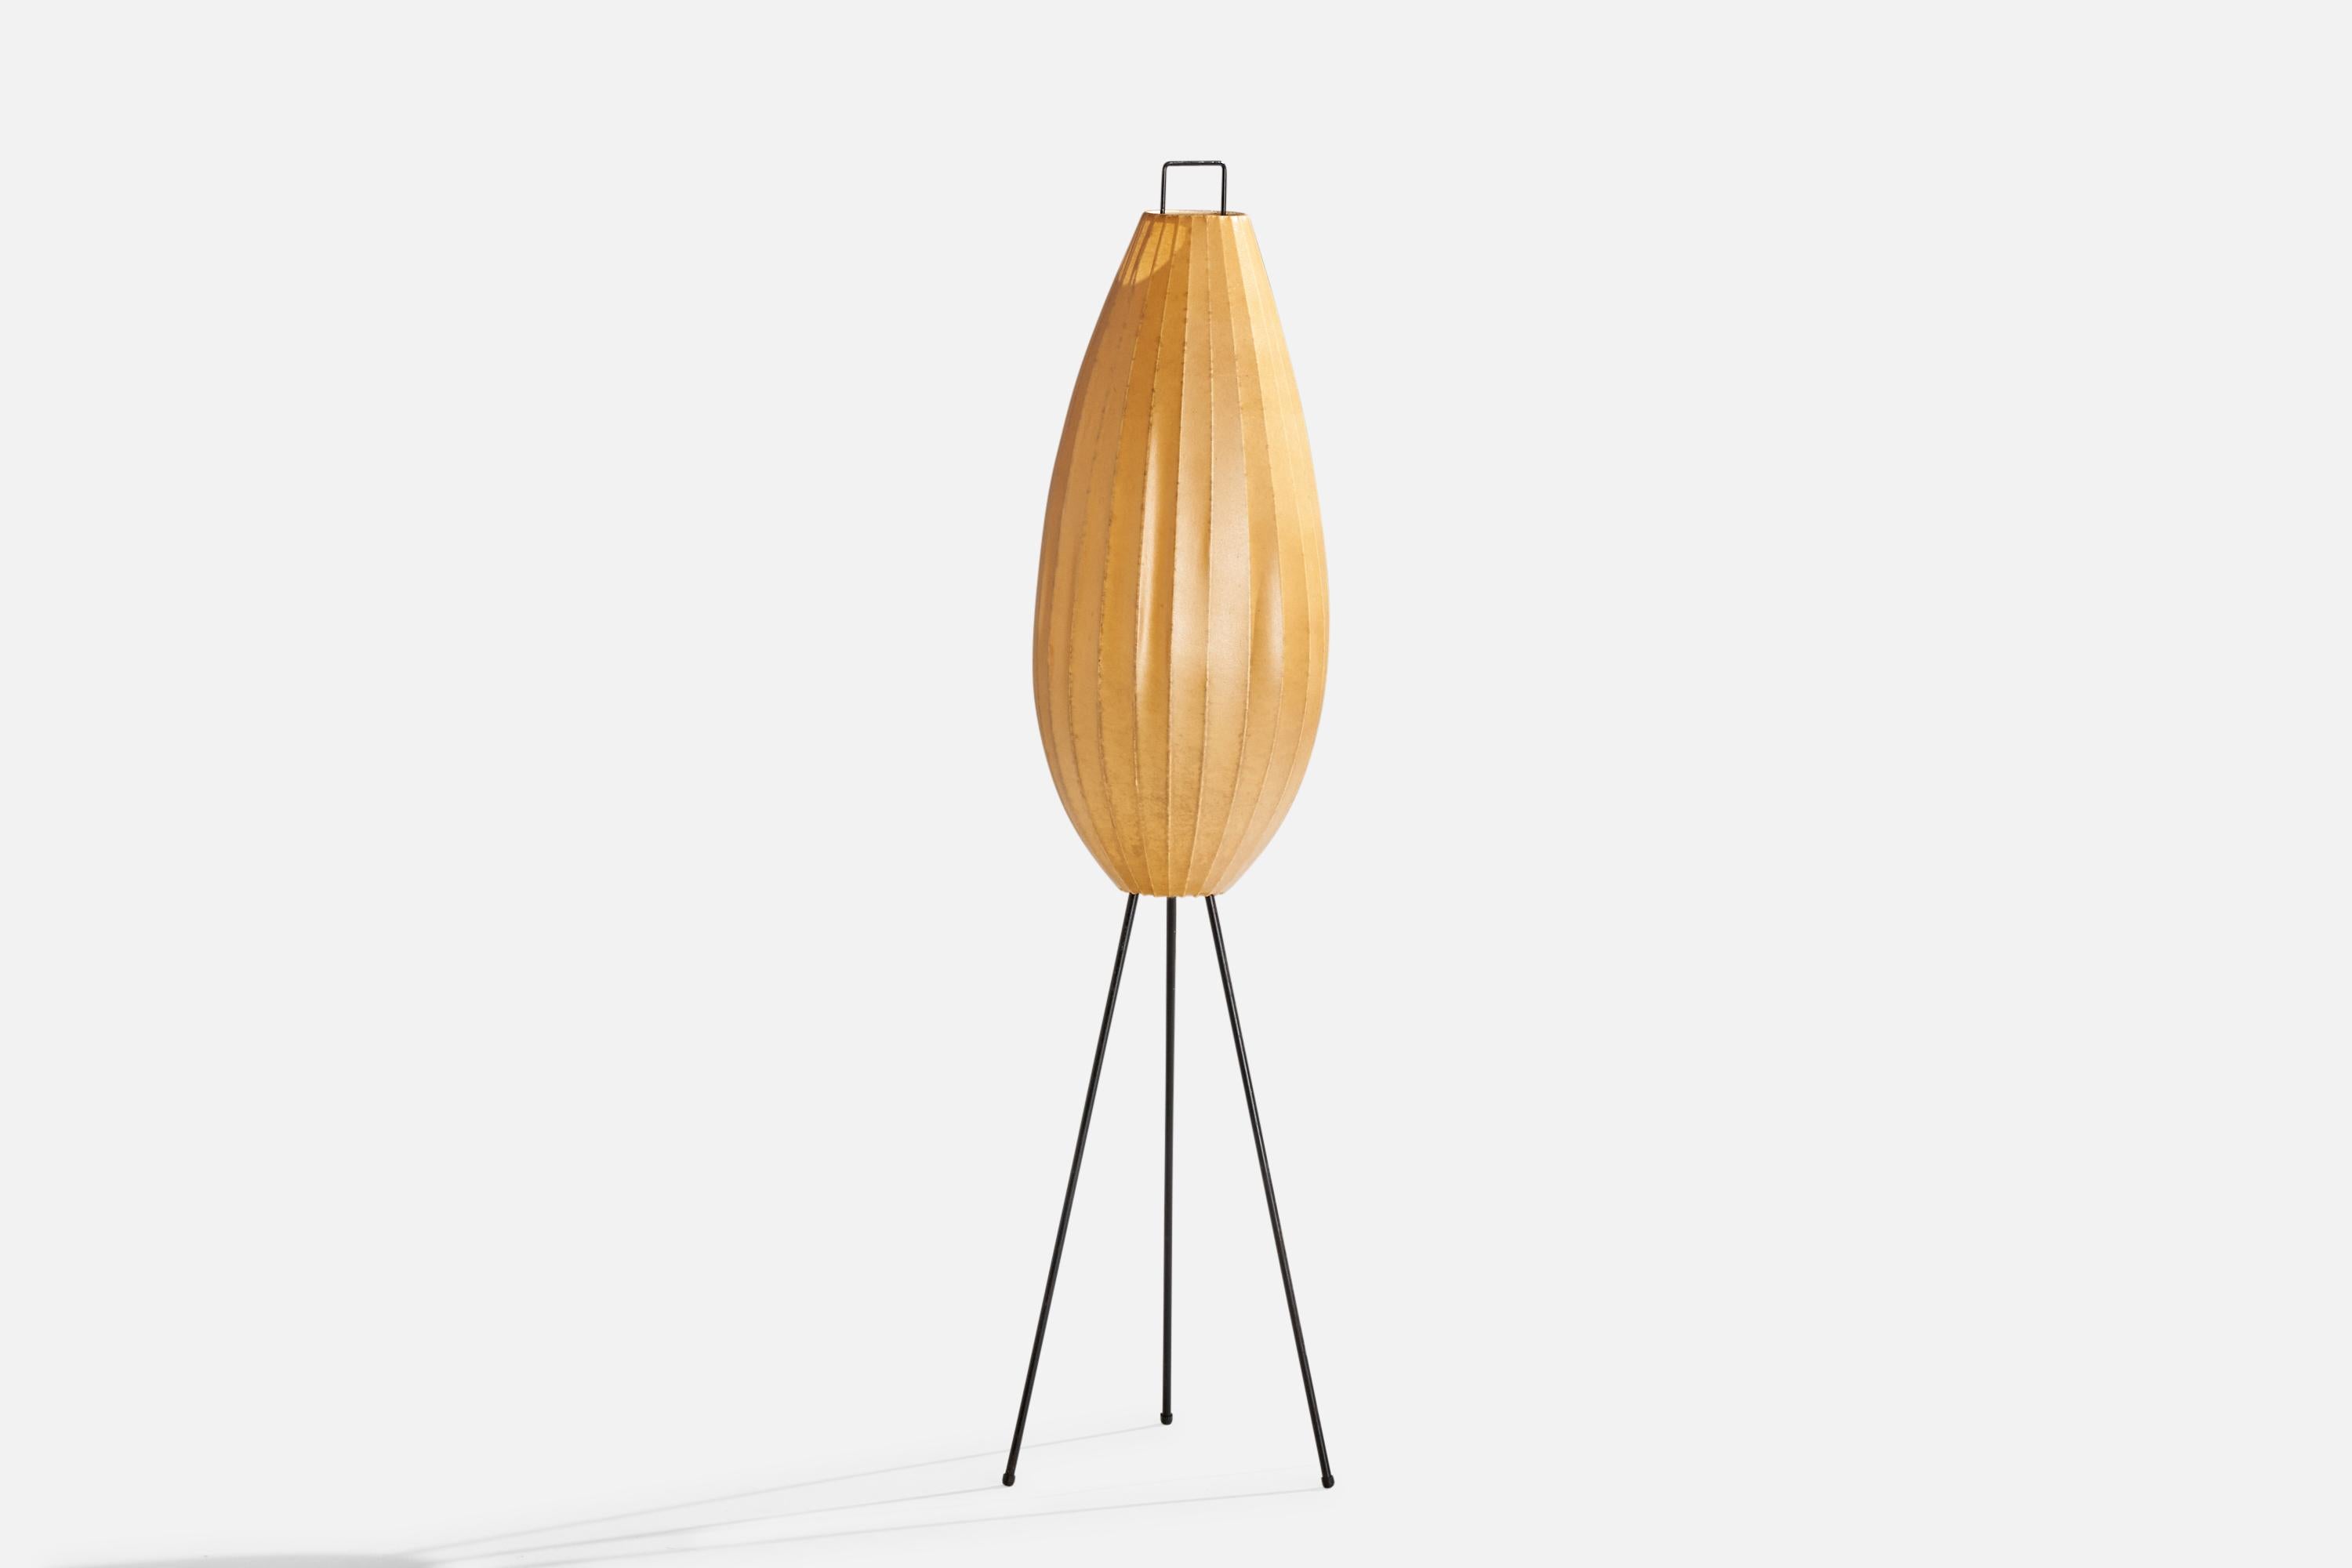 A black-lacquered metal and beige resin floor lamp designed and produced in Italy, c. 1960s.

Overall Dimensions (inches): 50.75” H x 7.25” D
Stated dimensions include shade.
Bulb Specifications: E-26 Bulb
Number of Sockets: 1
All lighting will be